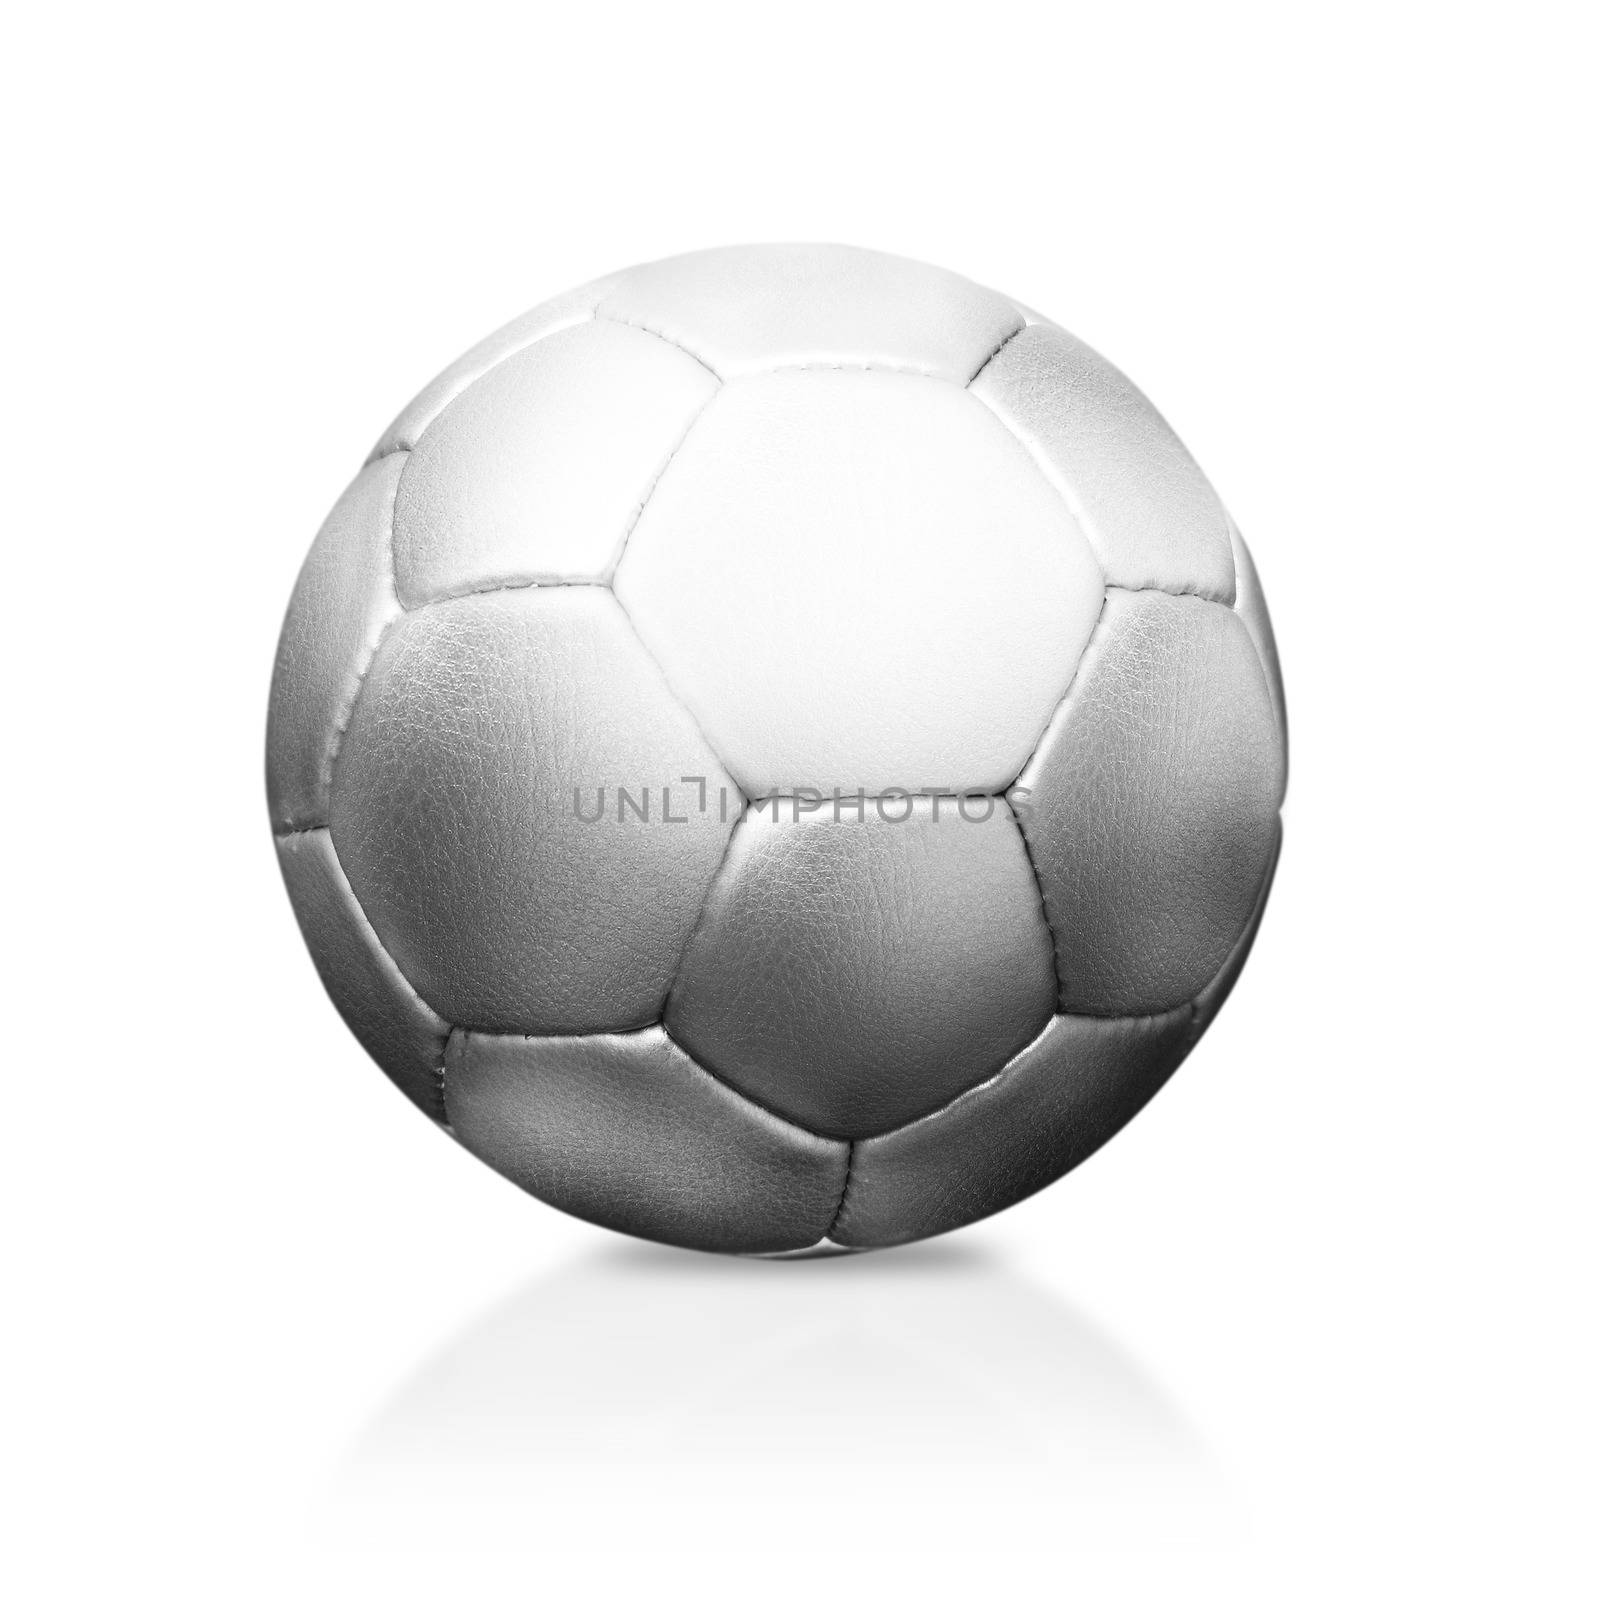 Silver soccer ball or Football isolated on white, (clipping work path included)